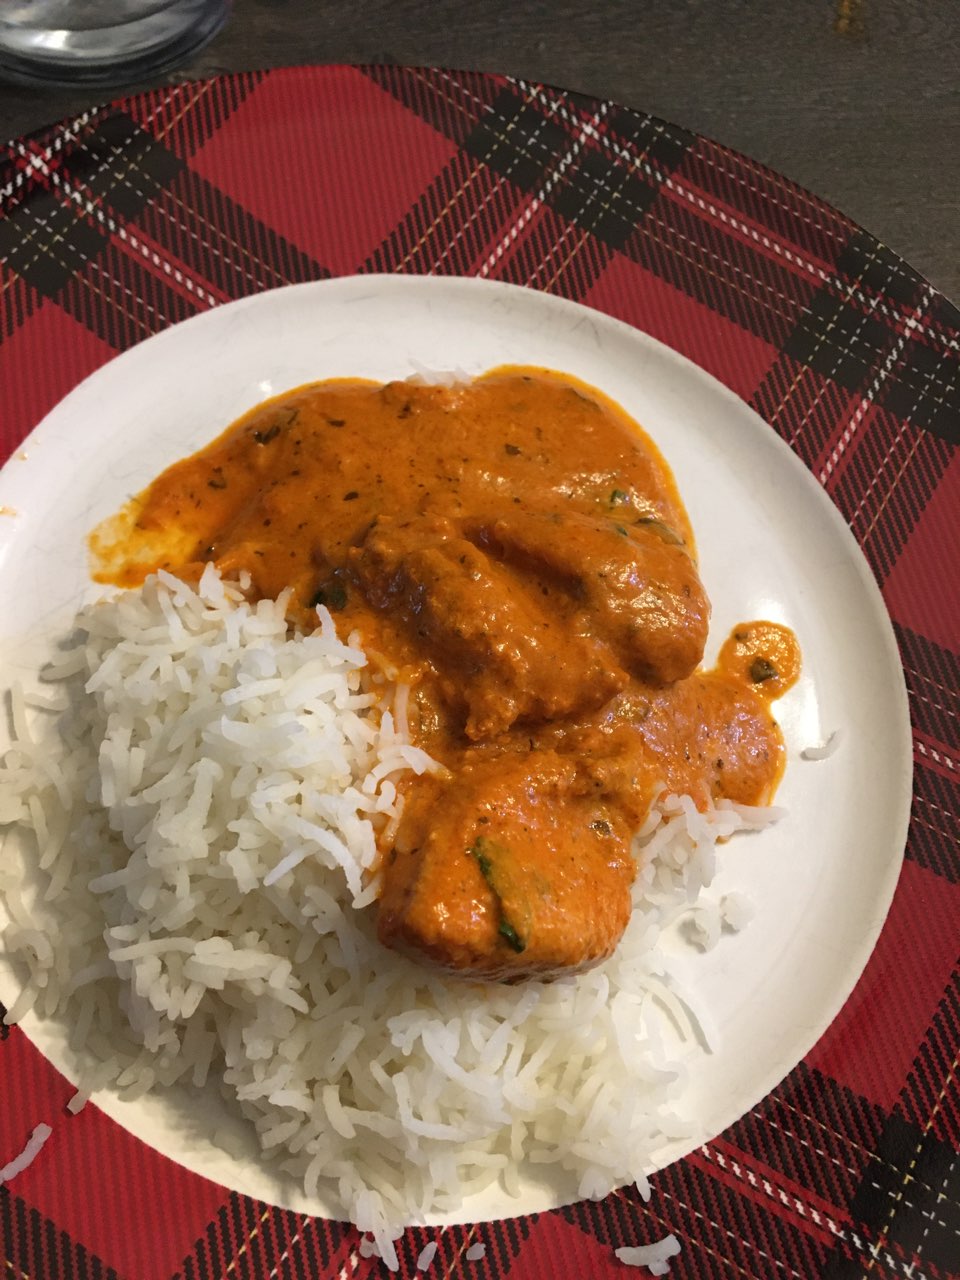 Spice India Indian Cuisine | meal takeaway | 175 Argyle Ave N, Listowel, ON N4W 1M7, Canada | 5192916363 OR +1 519-291-6363